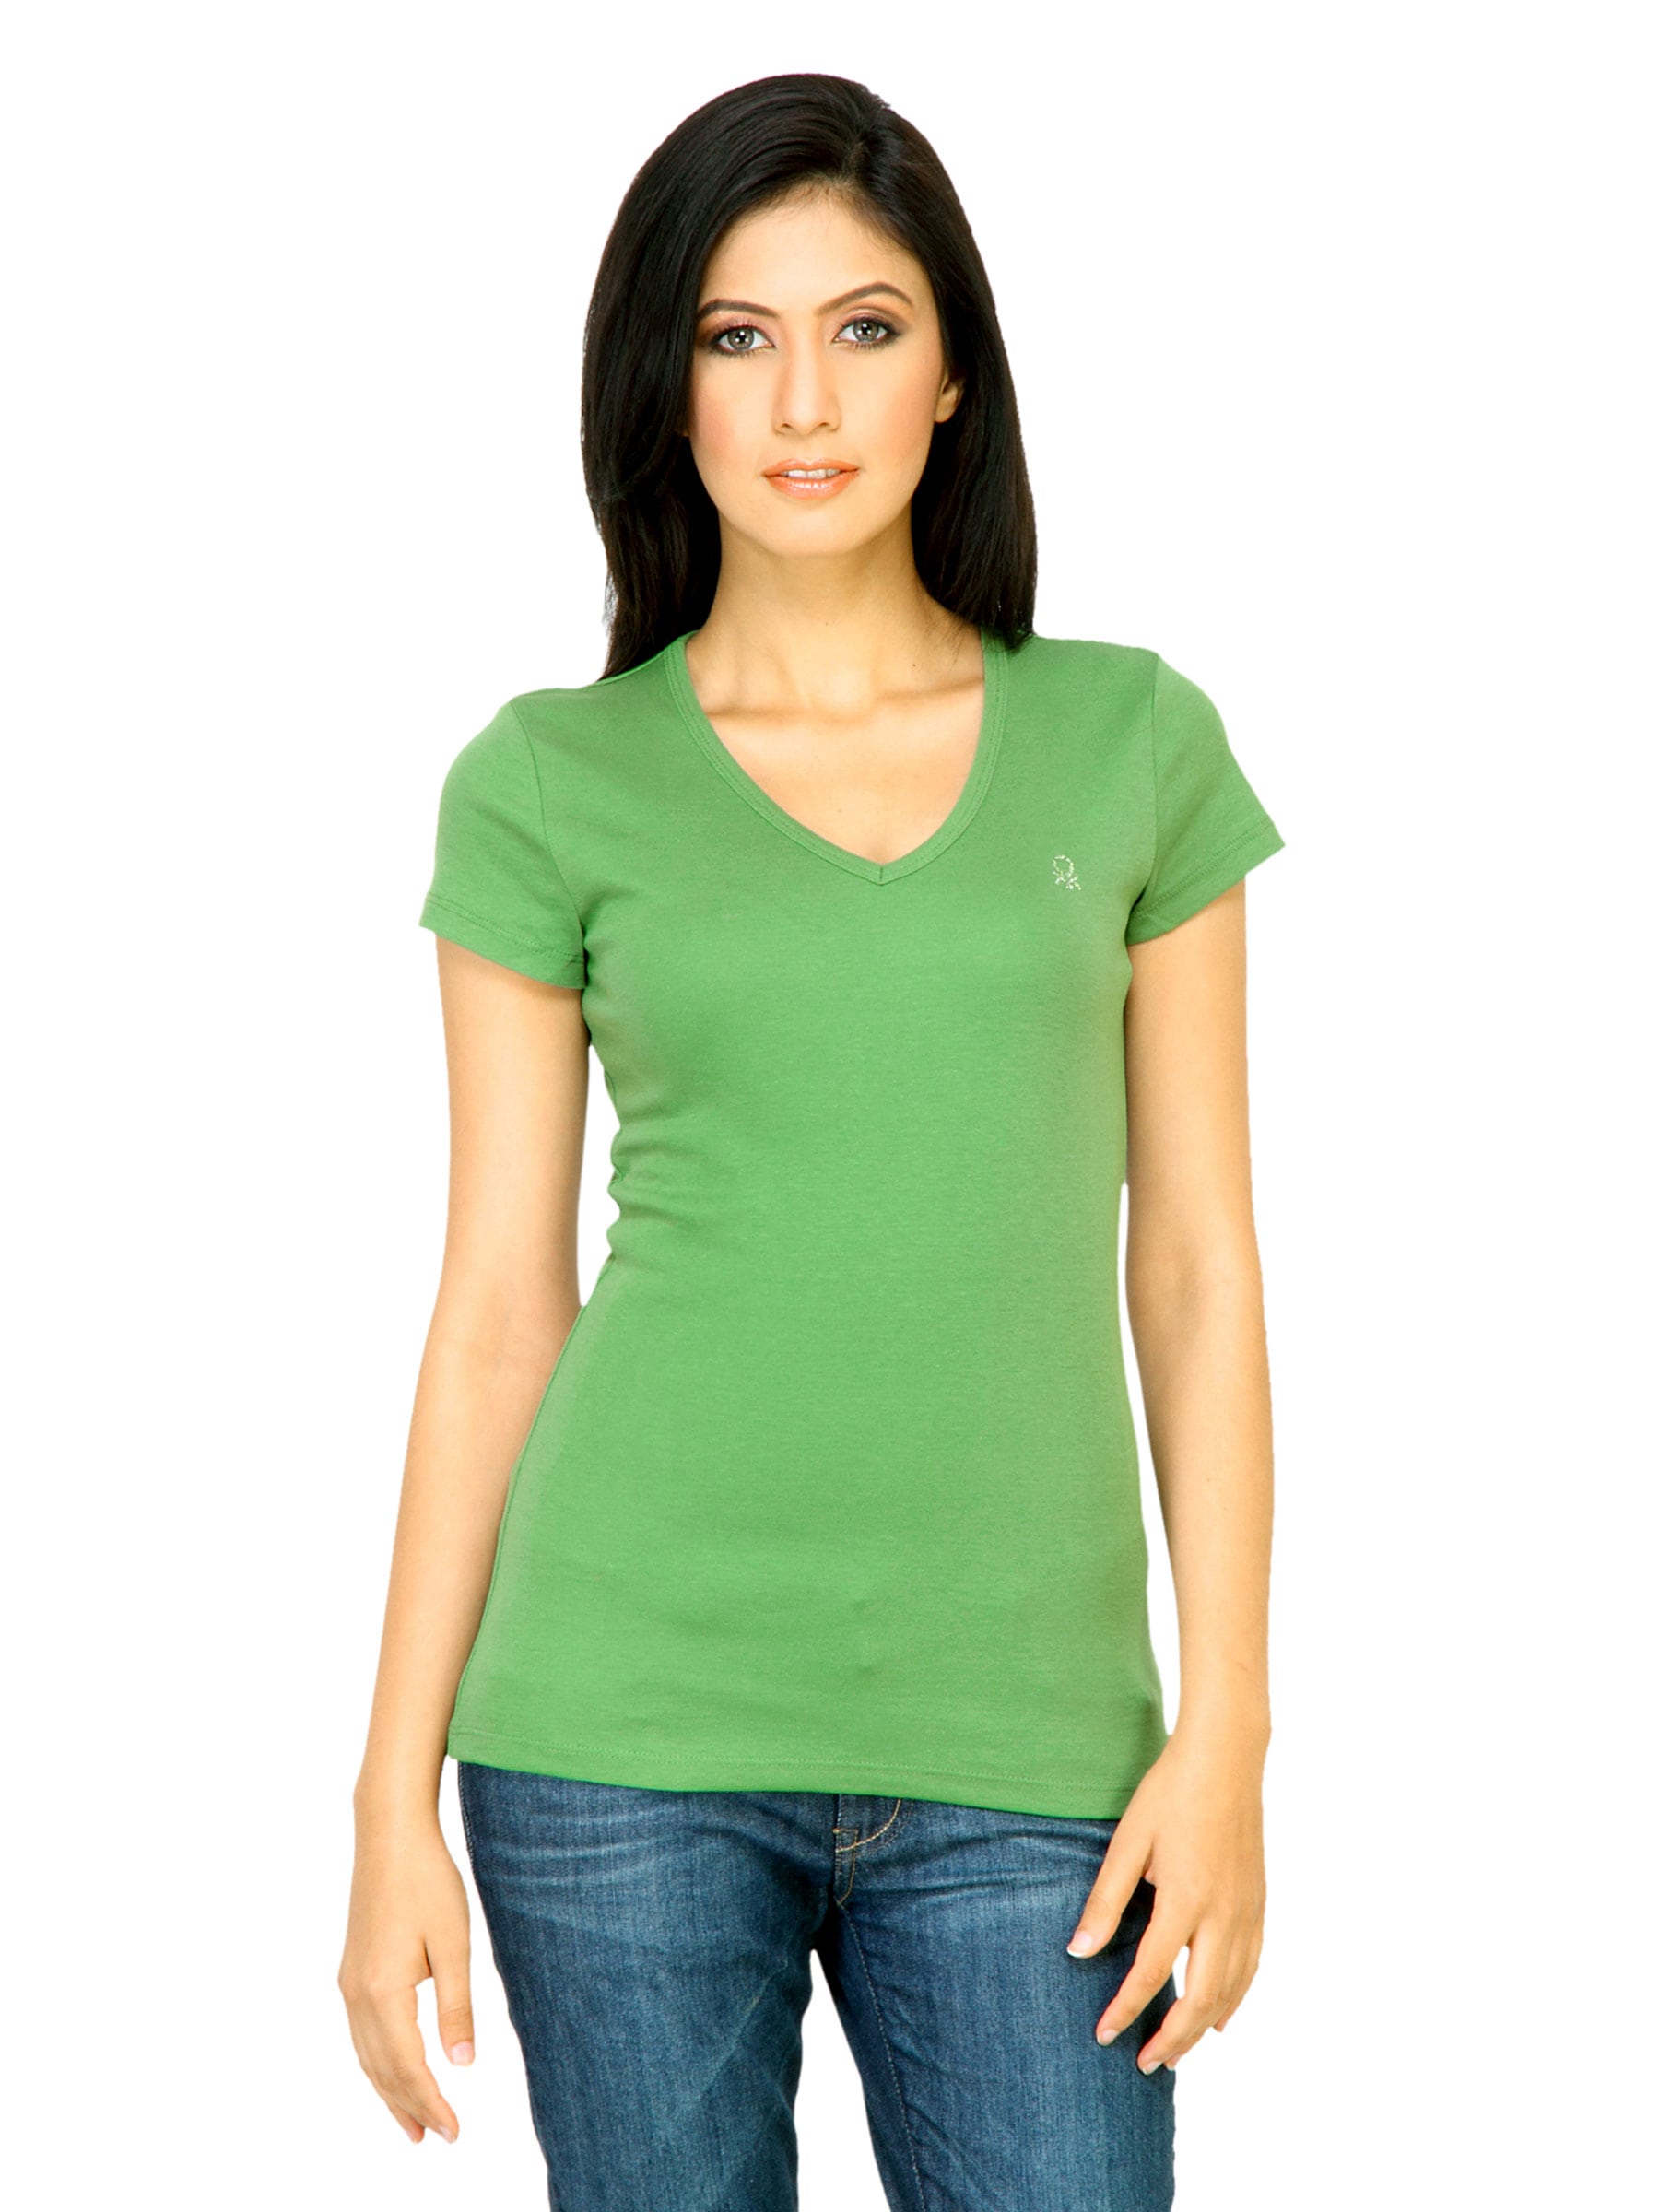 United Colors of Benetton Women Solid Green Tops